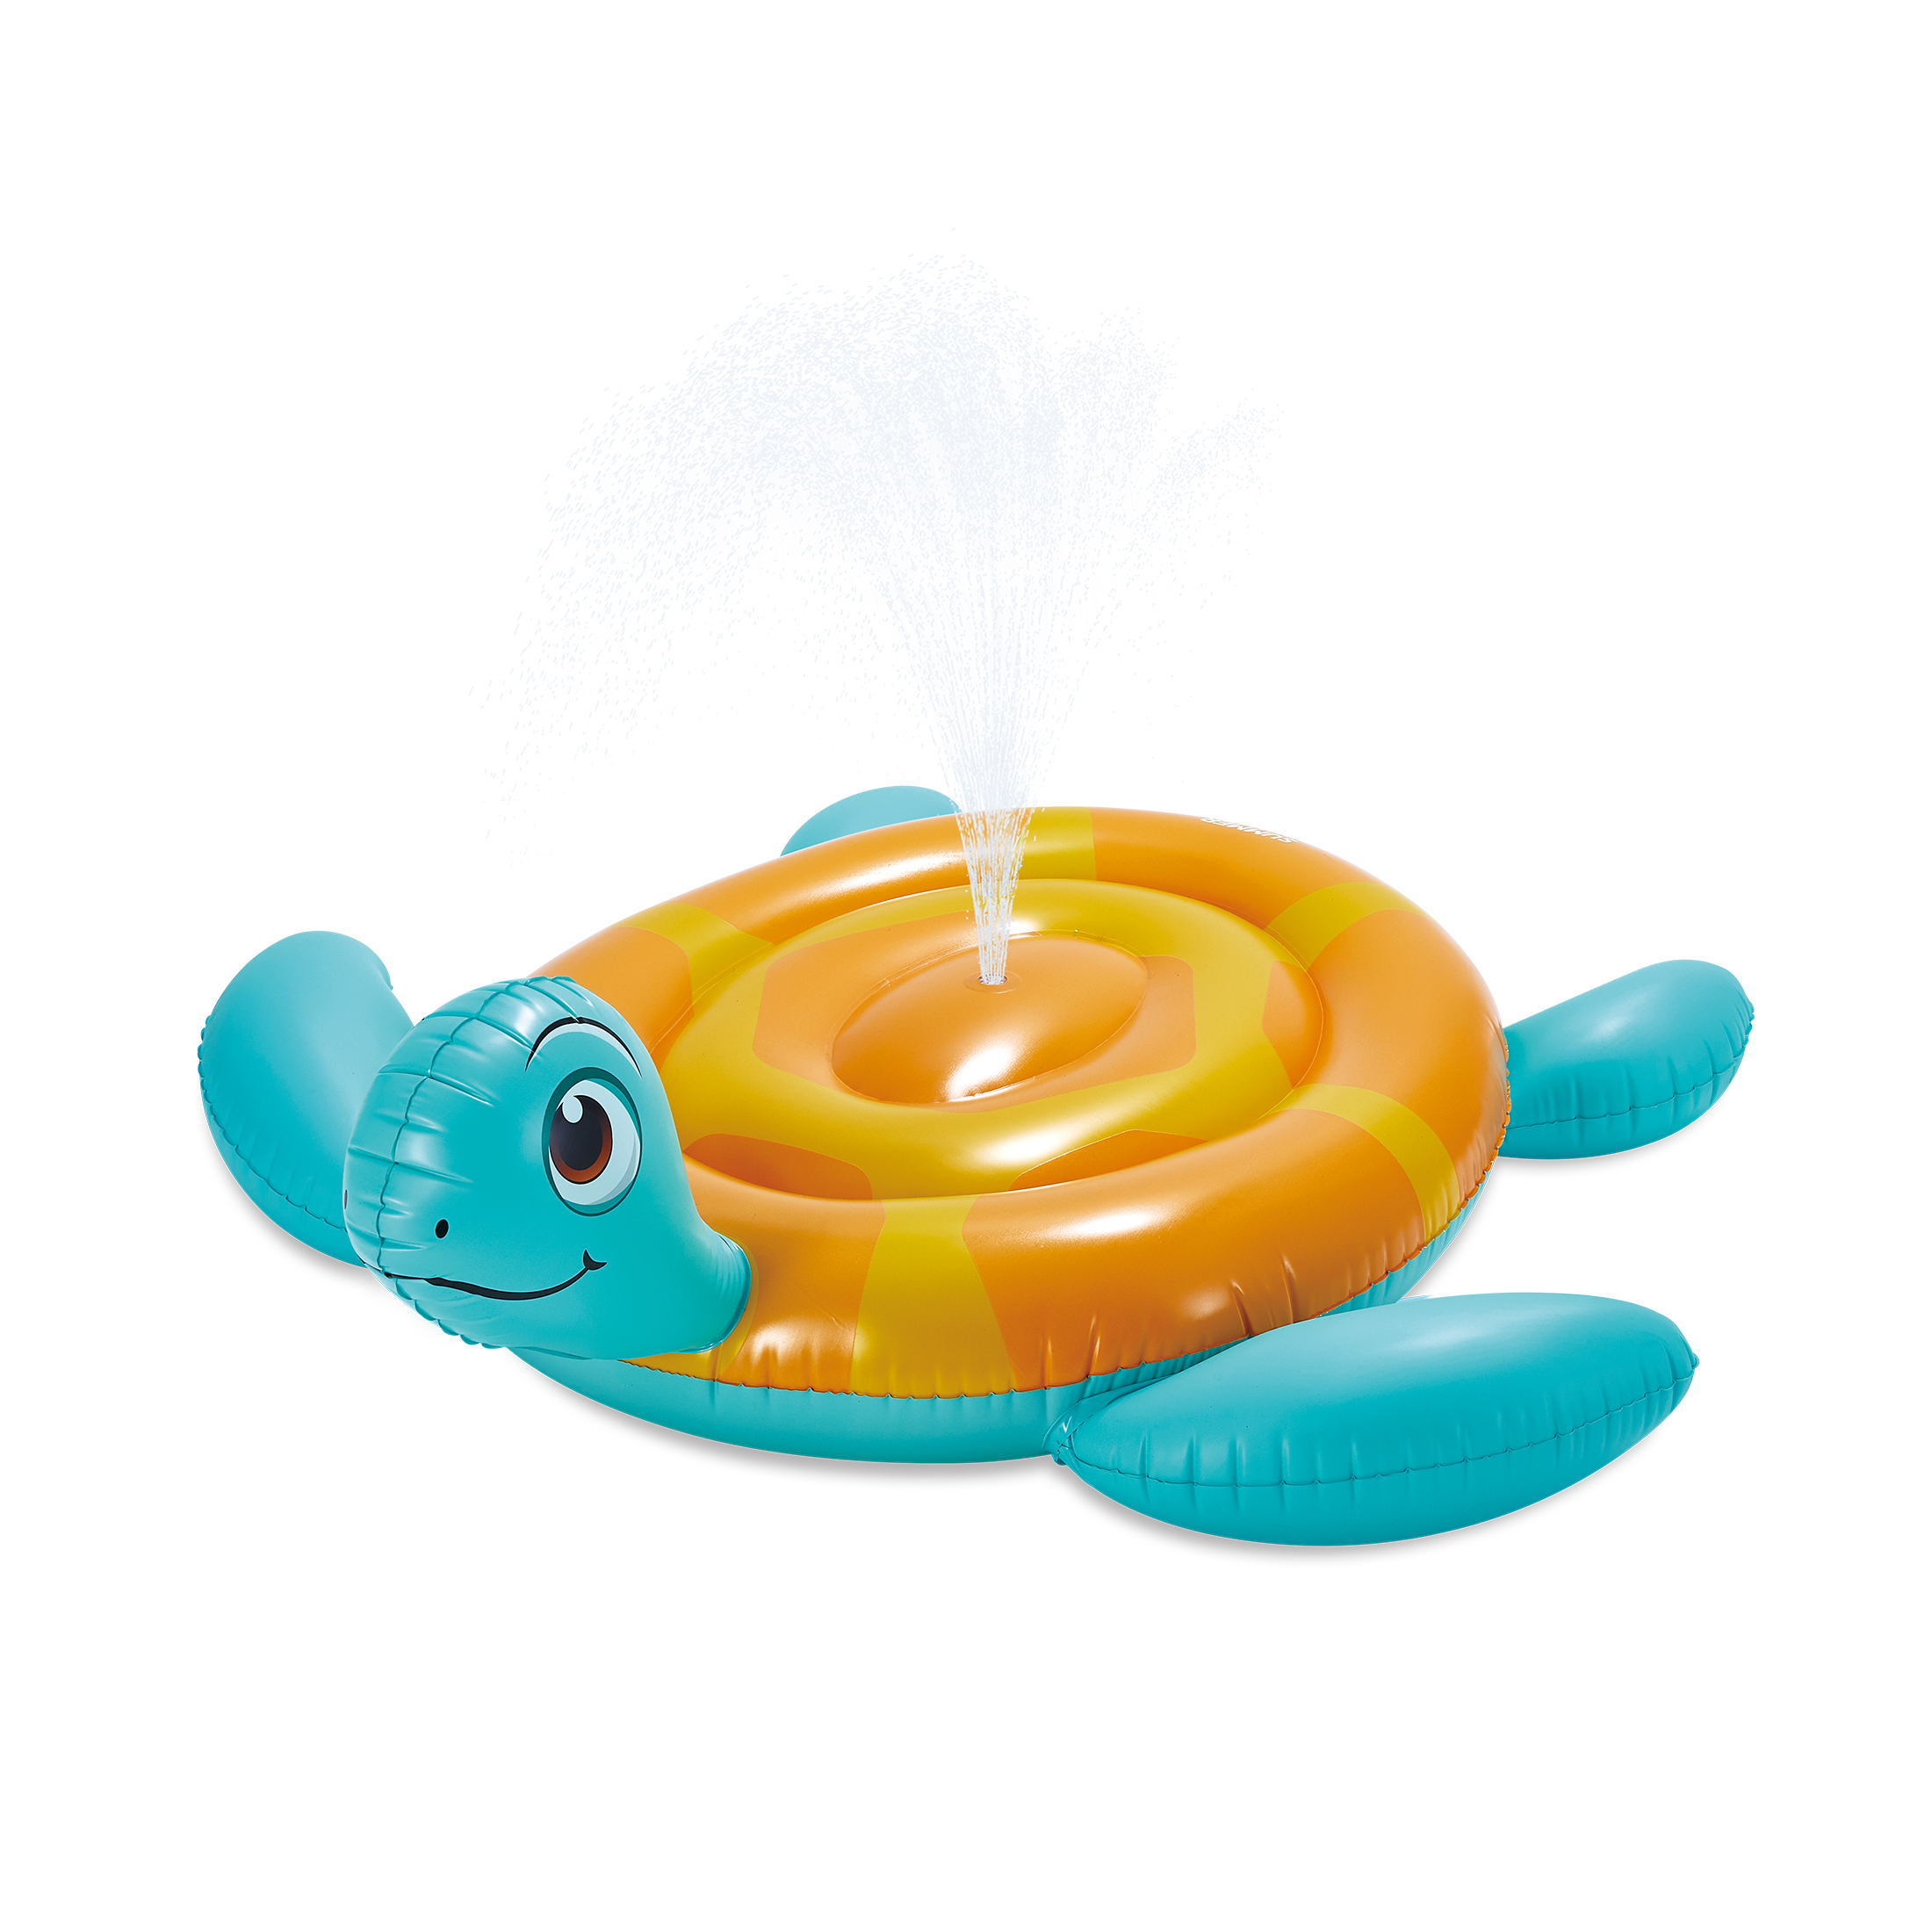 Play Day Inflatable Sea Turtle Water Sprinkler Yard Game, for Kids, Age 3 & up, Unisex - image 2 of 5